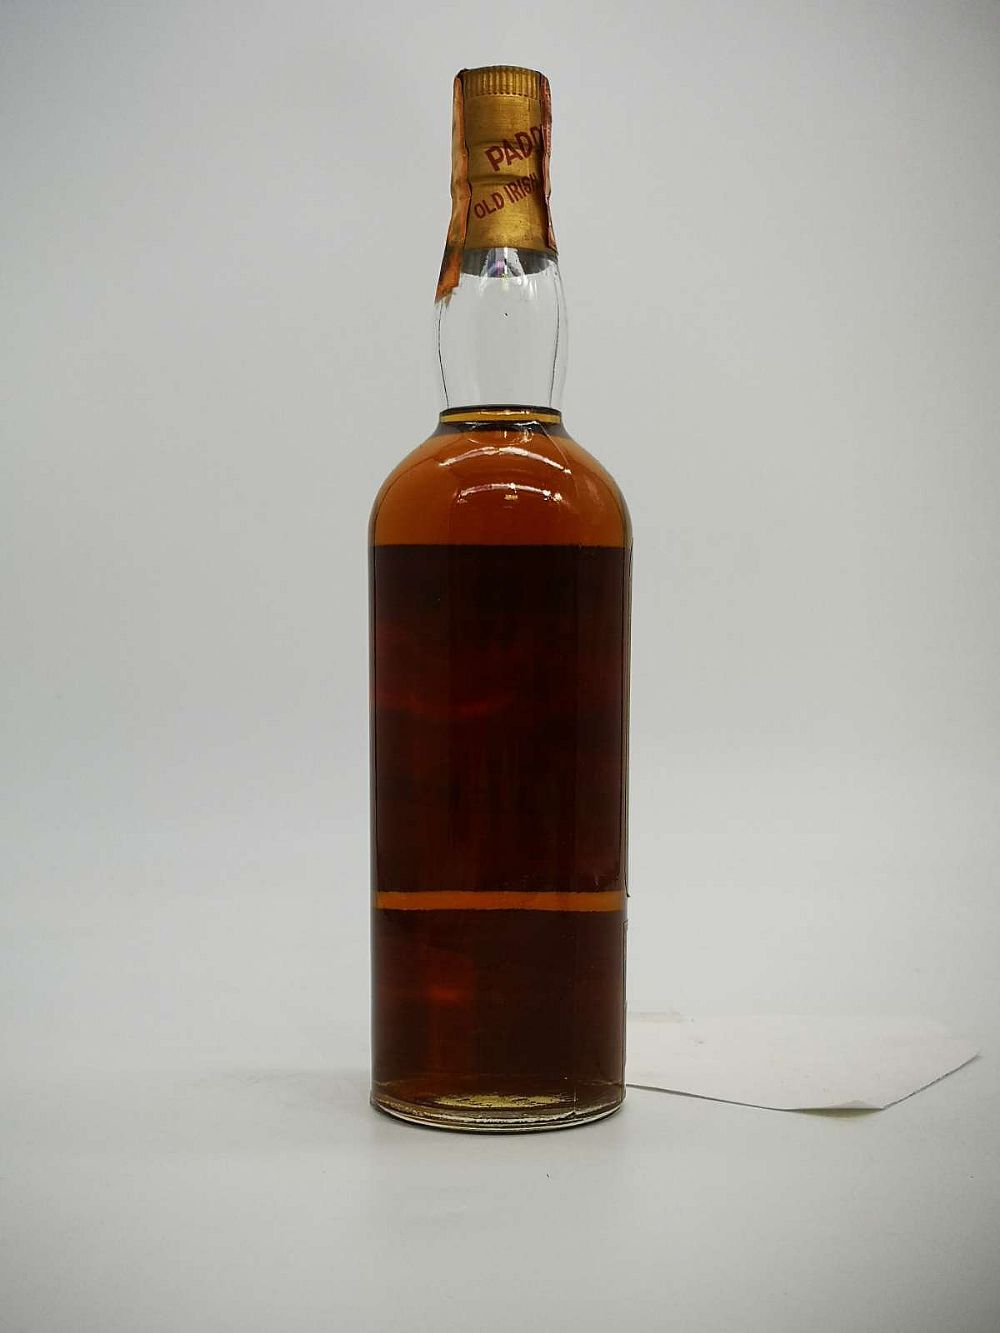 Paddy 10 year old, Old Irish Whiskey, Cork Distilleries Company, pre-1966 bottling